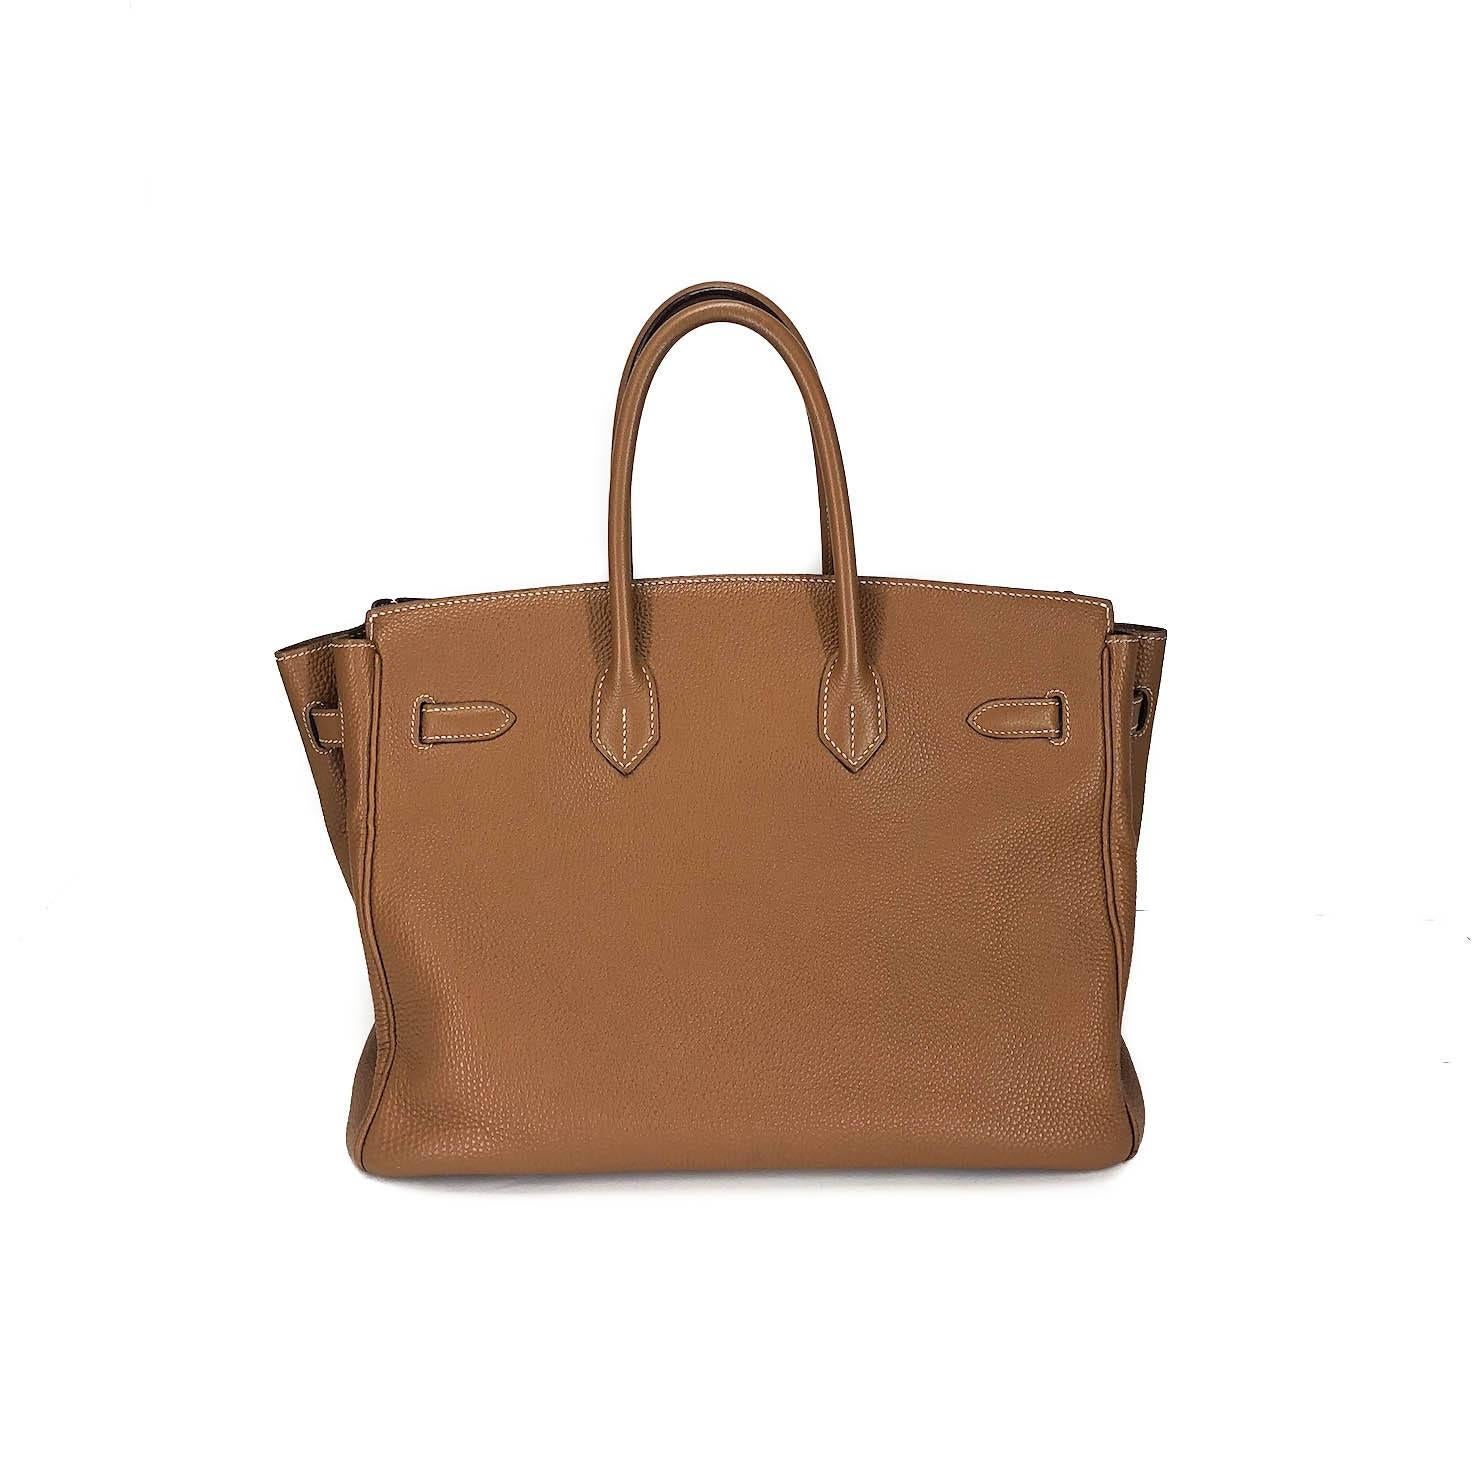 Well known for its iconic history, the Hermes Birkin 35  is both functional and chic. Coveted in this versatile Gold Clemence Leather shade, this item is the quintessential bag for modern urbanites. Guaranteed 100% authentic.

This Hermes Birkin is